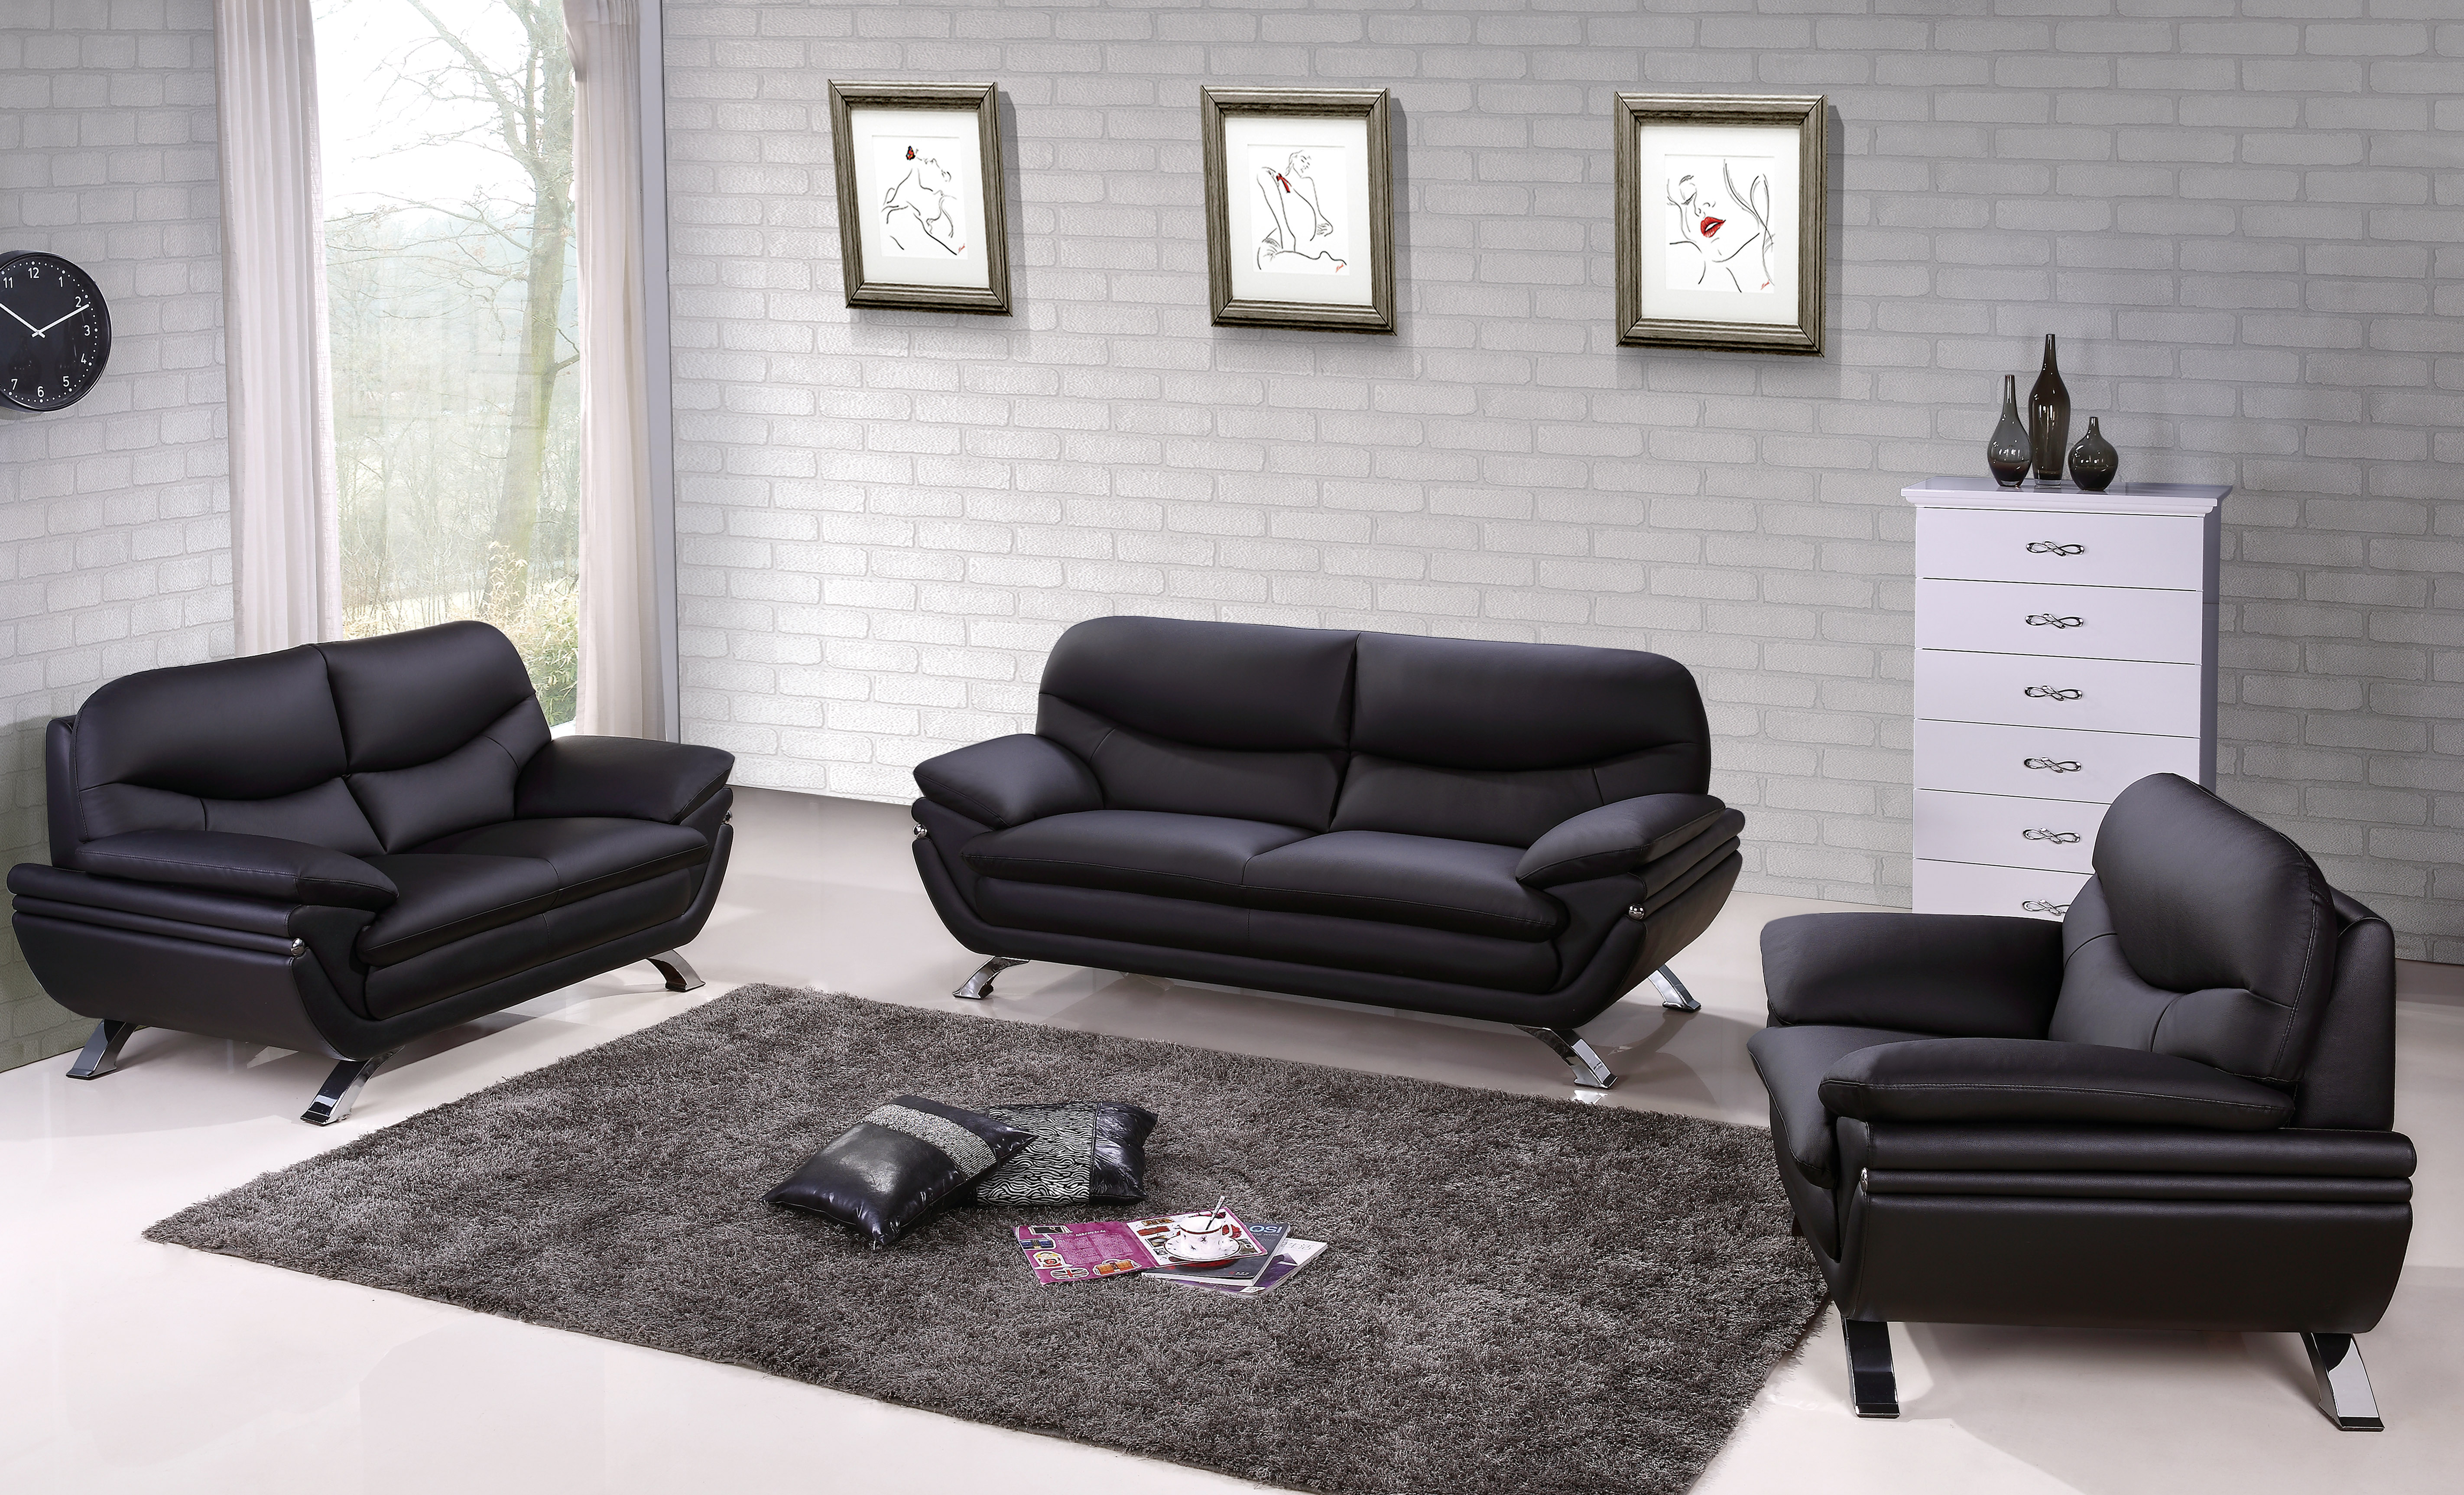 Harmony Ying Yang Contemporary Leather, Leather Livingroom Set